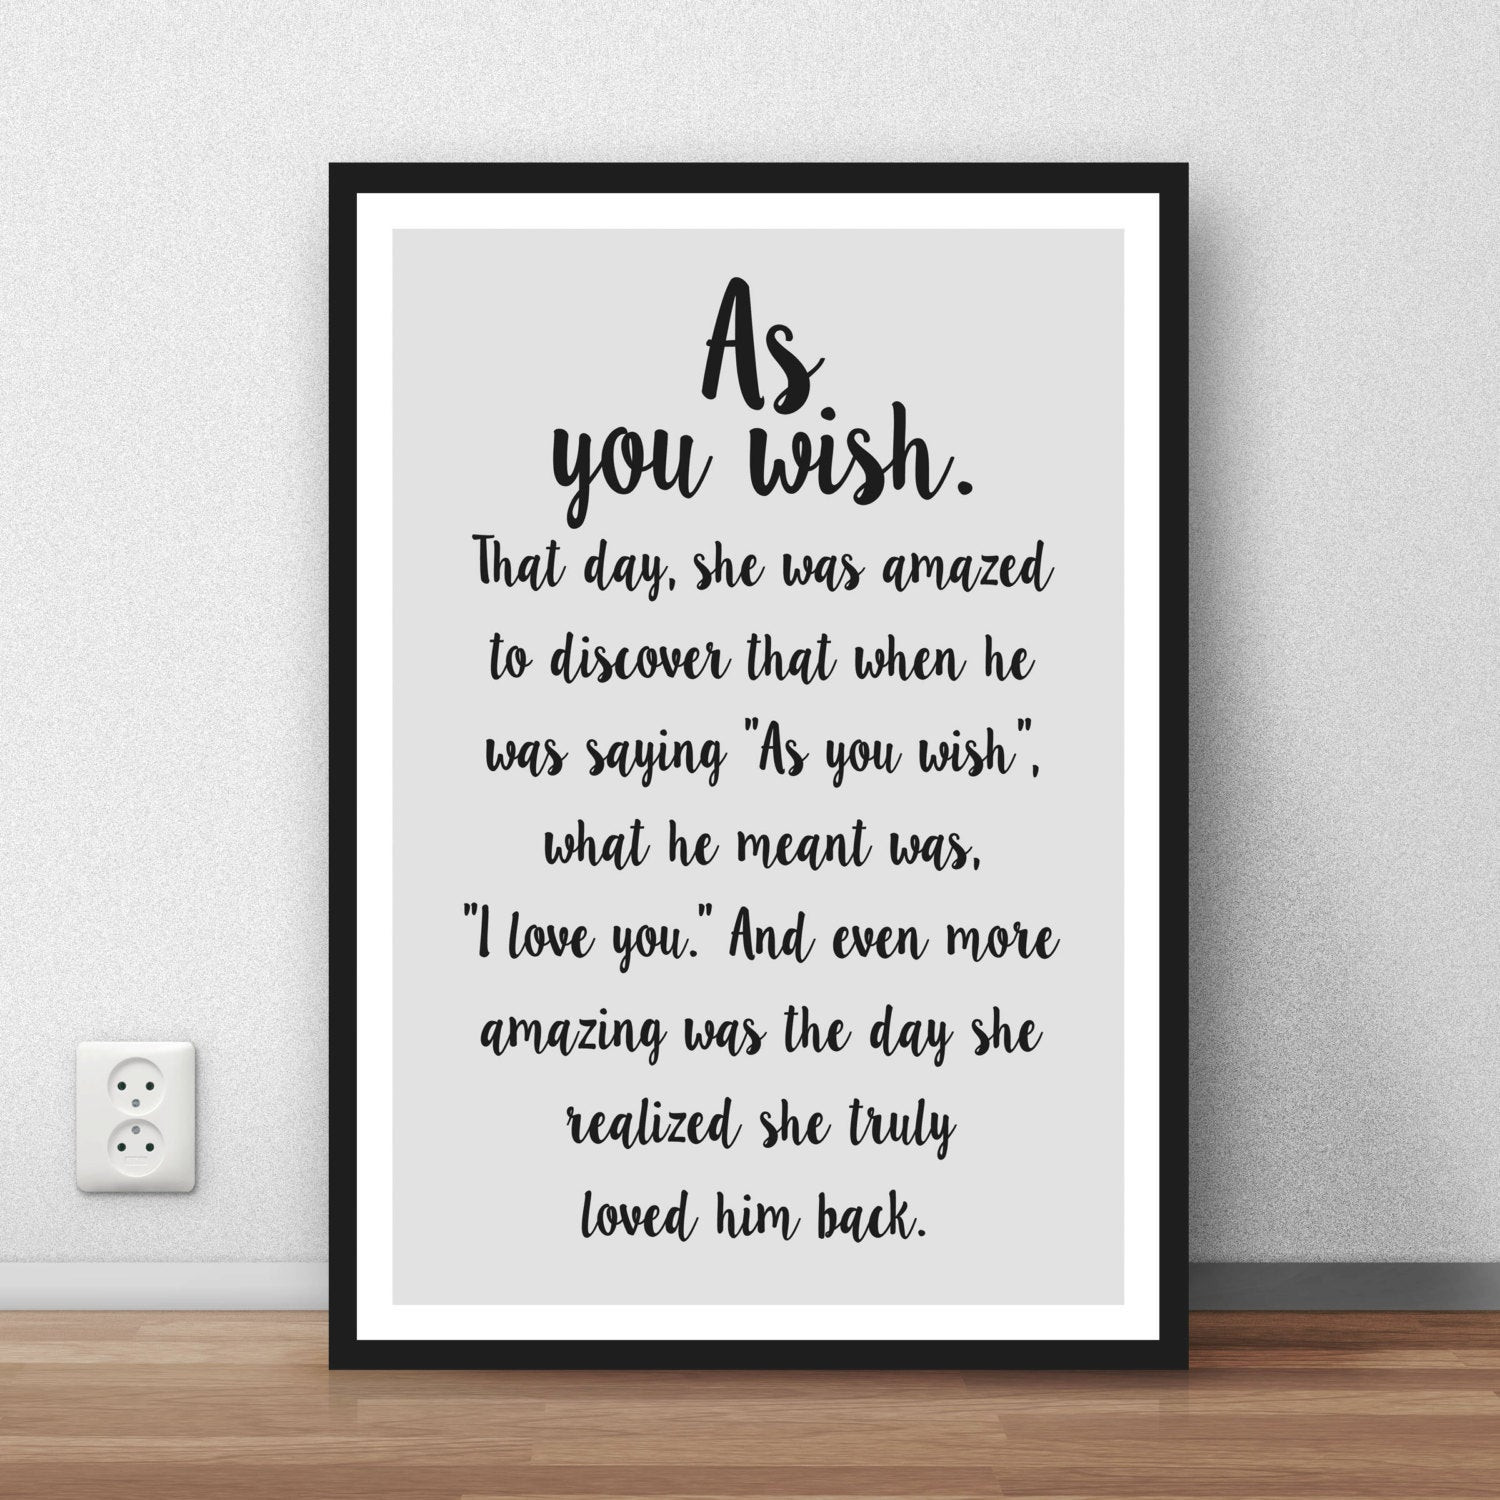 Princess Bride Marriage Quote
 The 25 Best Ideas for Princess Bride Marriage Quotes